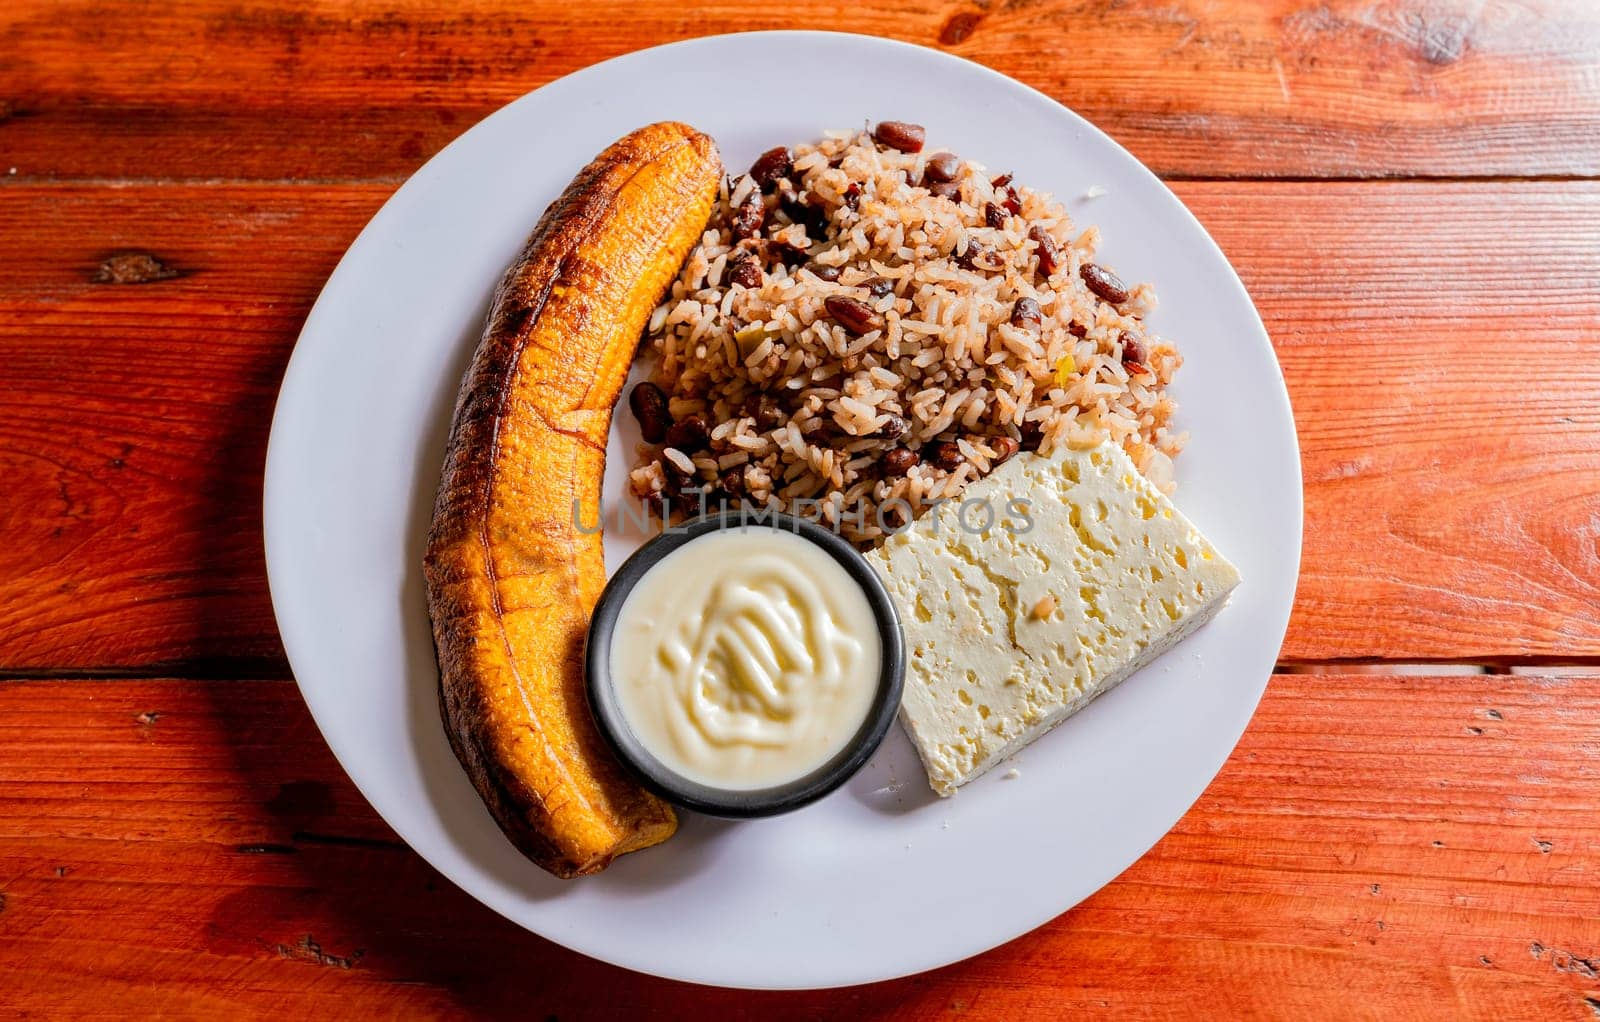 Gallopinto plate with cheese and maduro on wooden table. Nicaraguan food concept, Traditional Gallo Pinto meal with maduro and cheese served by isaiphoto